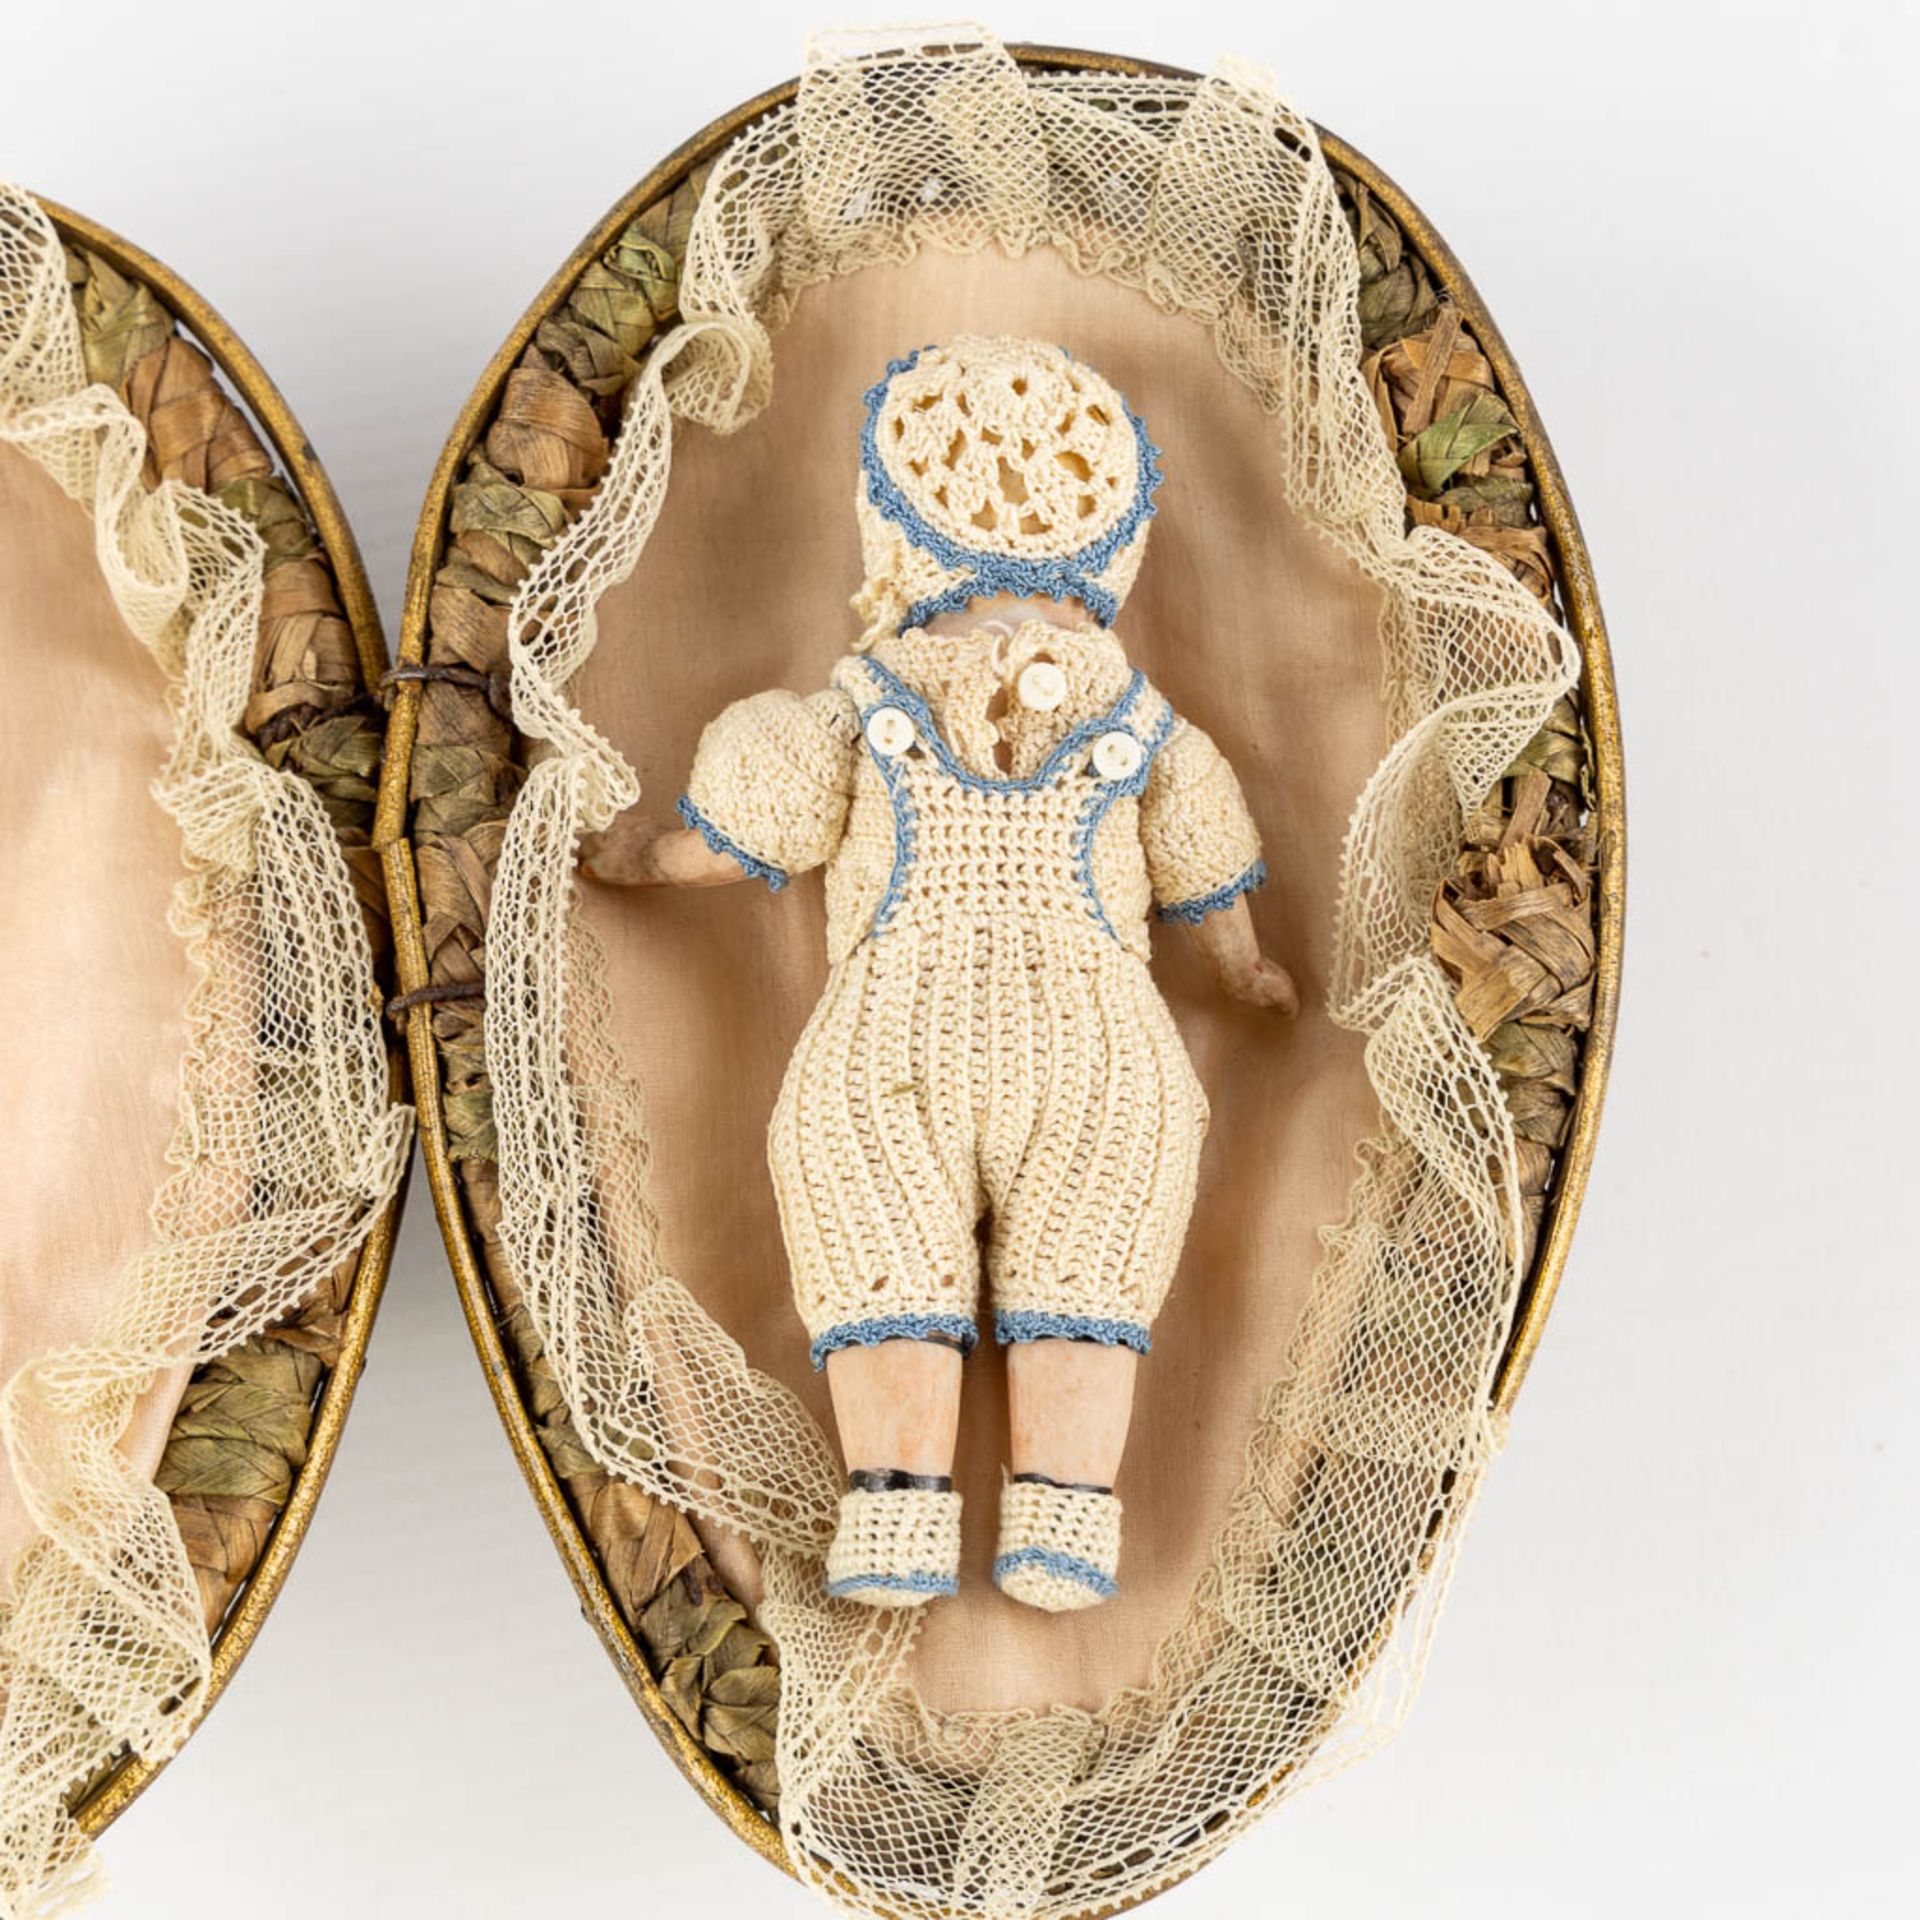 Three antique dolls, stored in a woven basket. (L:11,5 x W:17 x H:7 cm) - Image 13 of 13